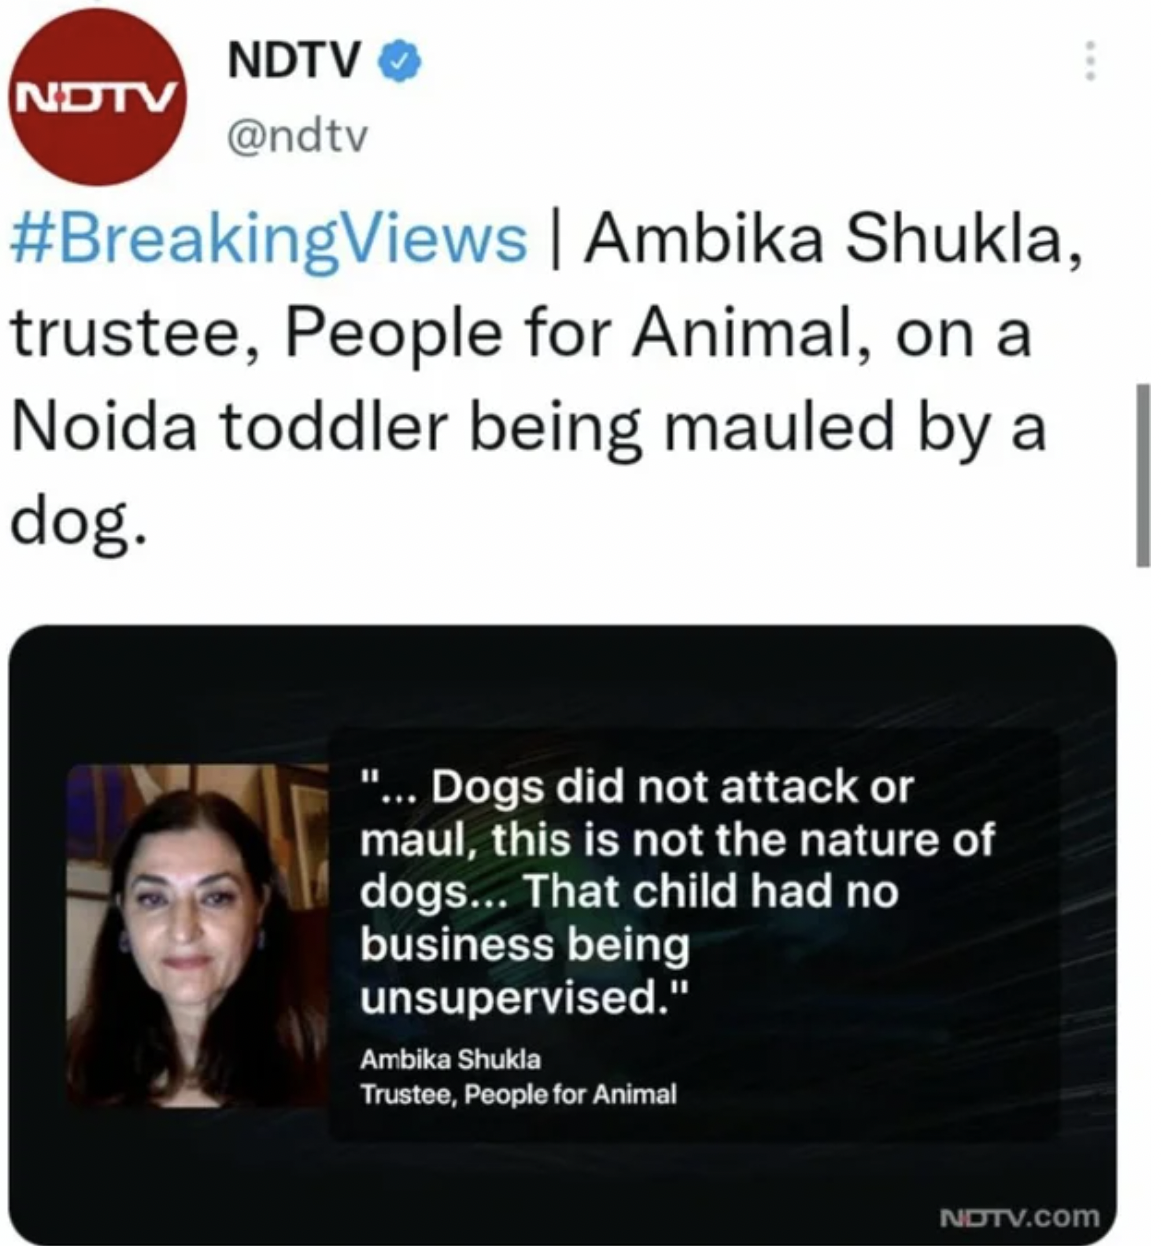 Confidently Incorrect - media - Ndtv Ndtv Views | Ambika Shukla, trustee, People for Animal, on a toddler being mauled by a dog.